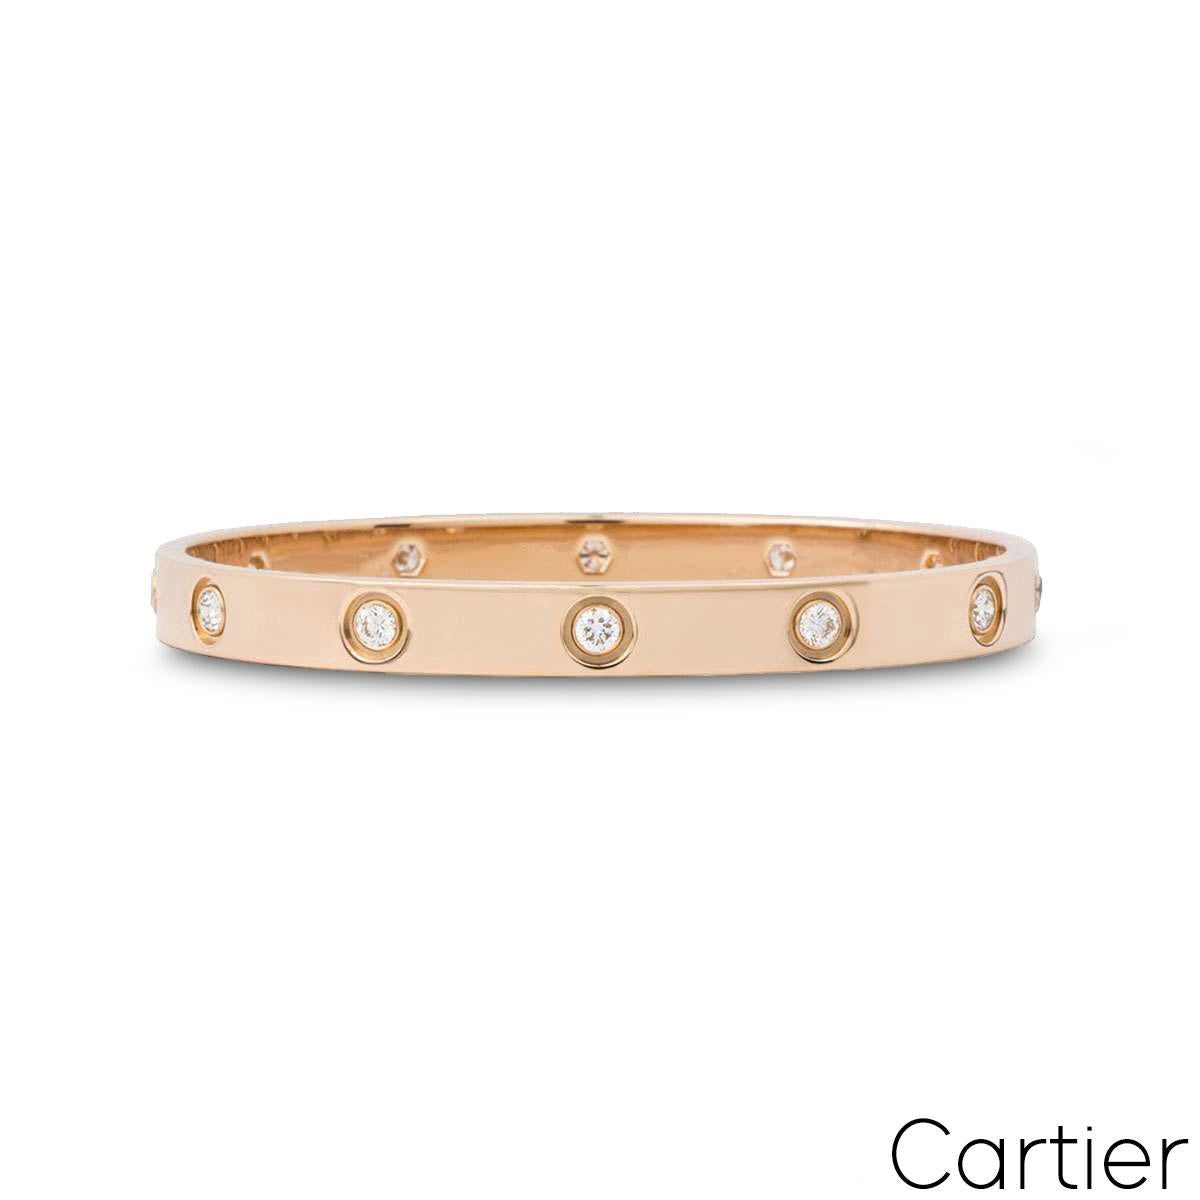 An 18k rose gold full diamond bracelet by Cartier from the Love Collection. The bracelet is set with 10 round brilliant cut diamonds circulating the outer edge throughout totalling 0.96ct. The bracelet is a size 18 and features the new style screw